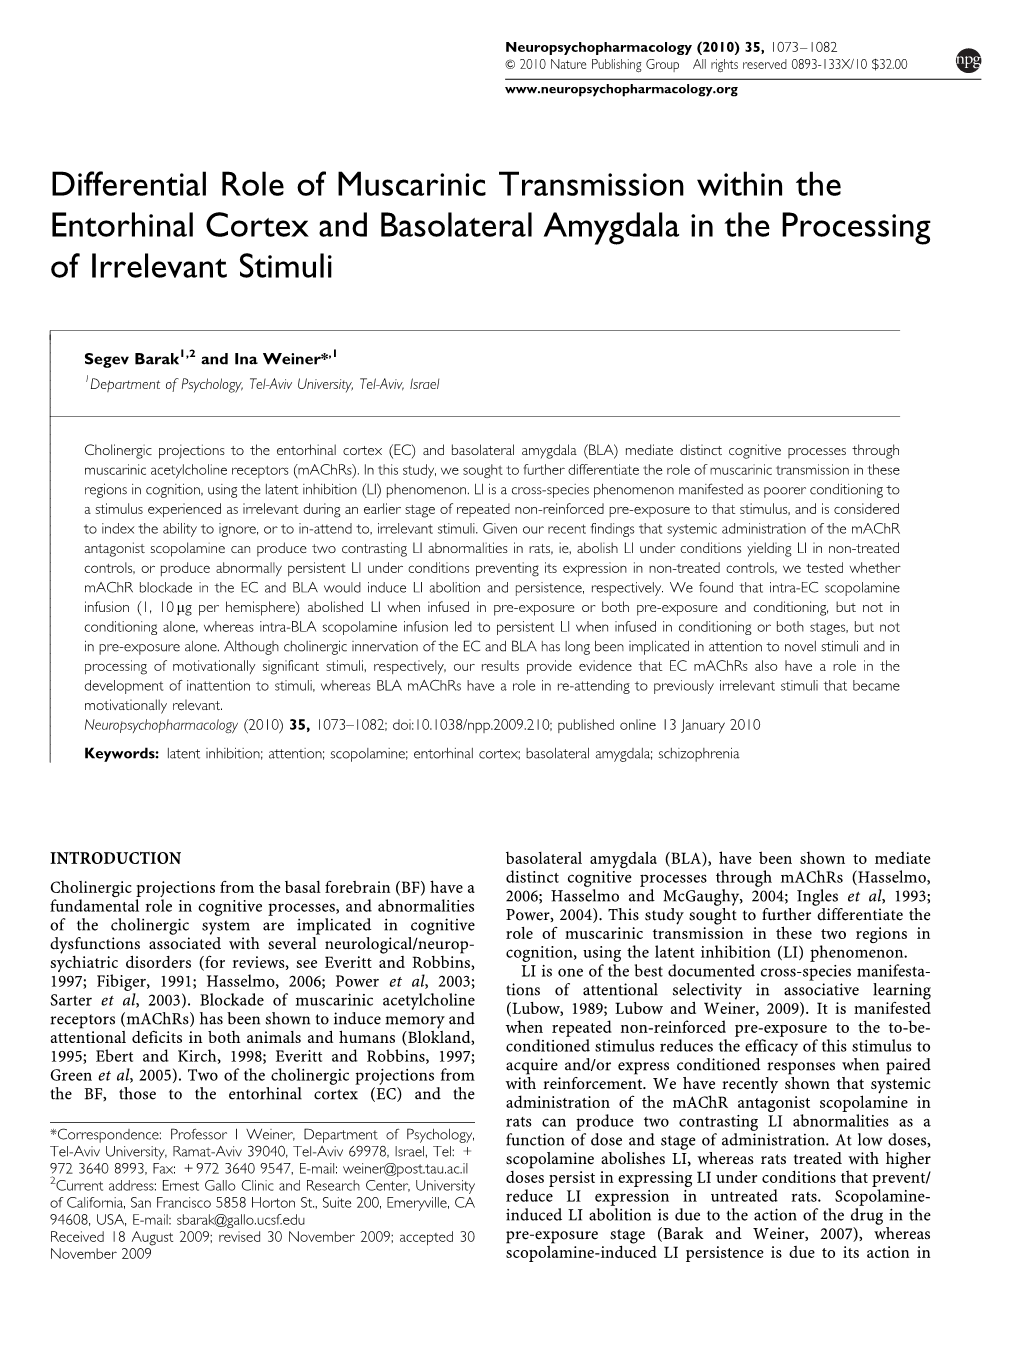 Differential Role of Muscarinic Transmission Within the Entorhinal Cortex and Basolateral Amygdala in the Processing of Irrelevant Stimuli